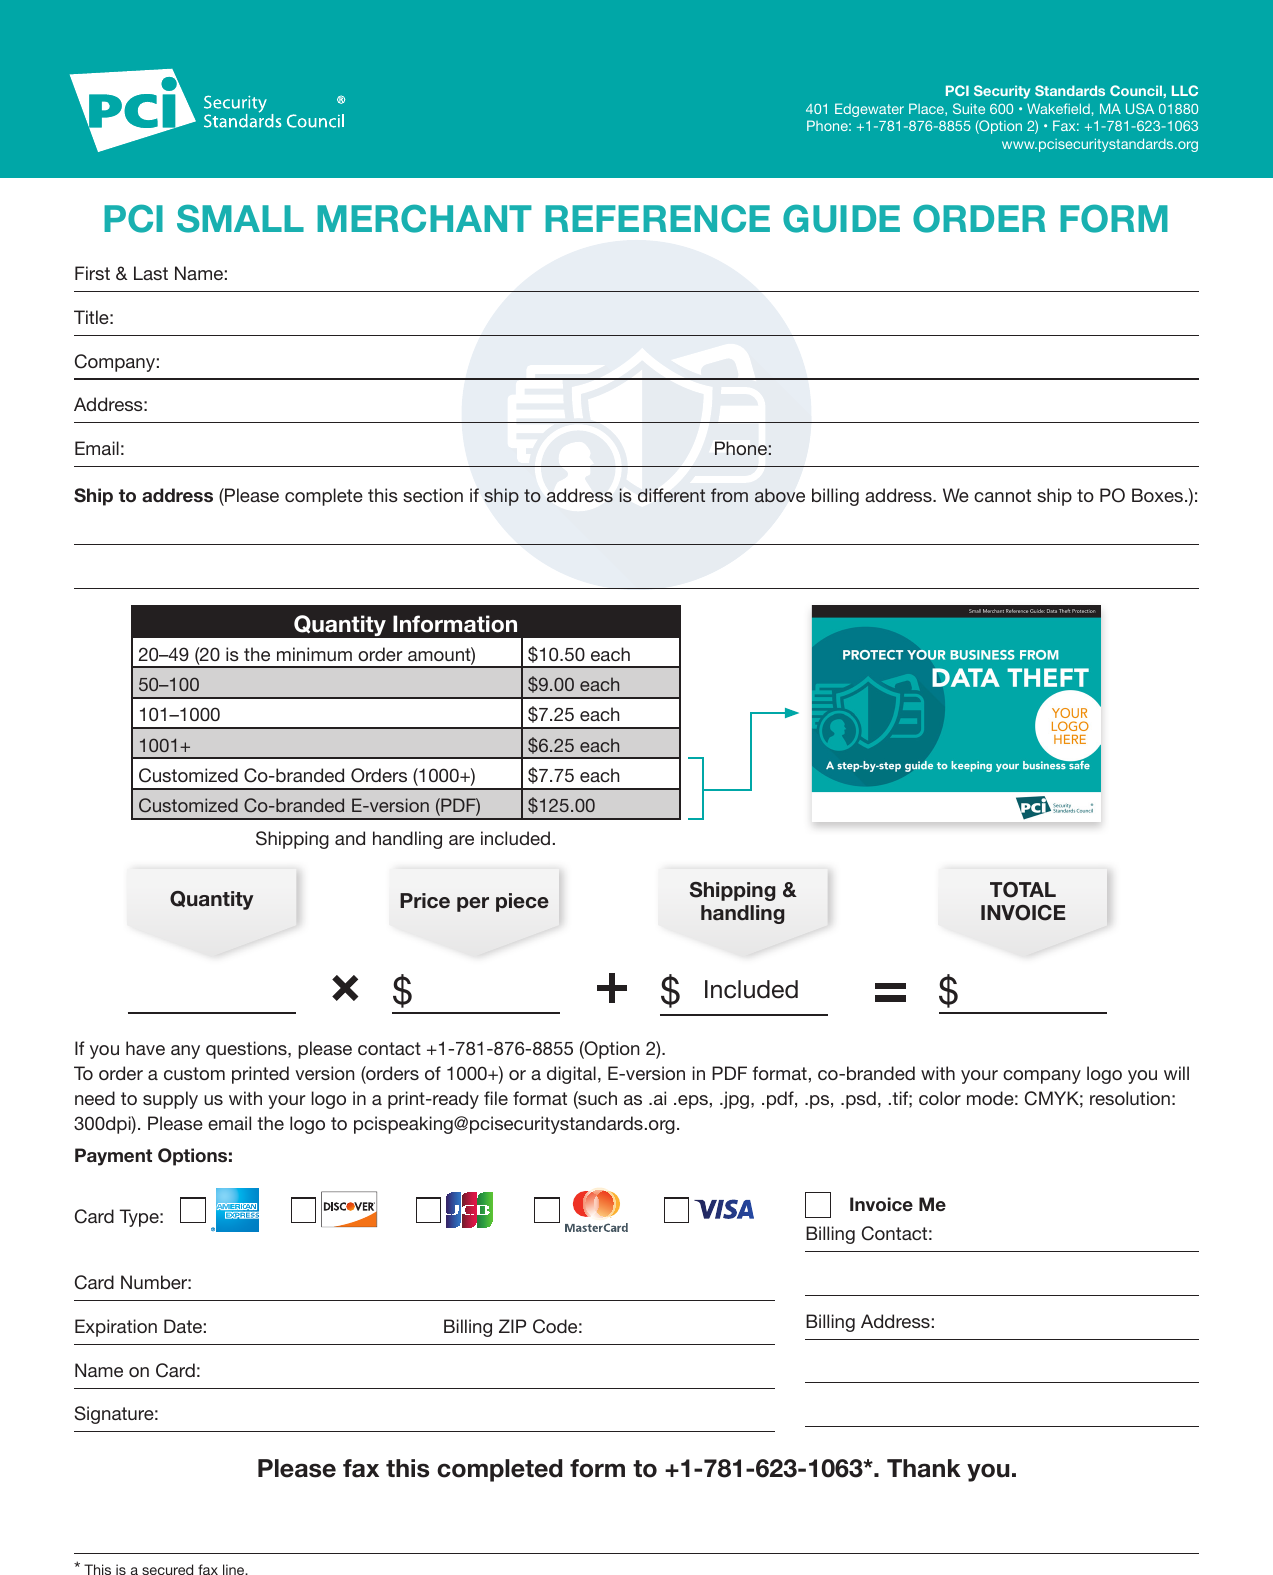 Page 1 of 1 - PCISSC Small Merchant Guide Order Form -v05